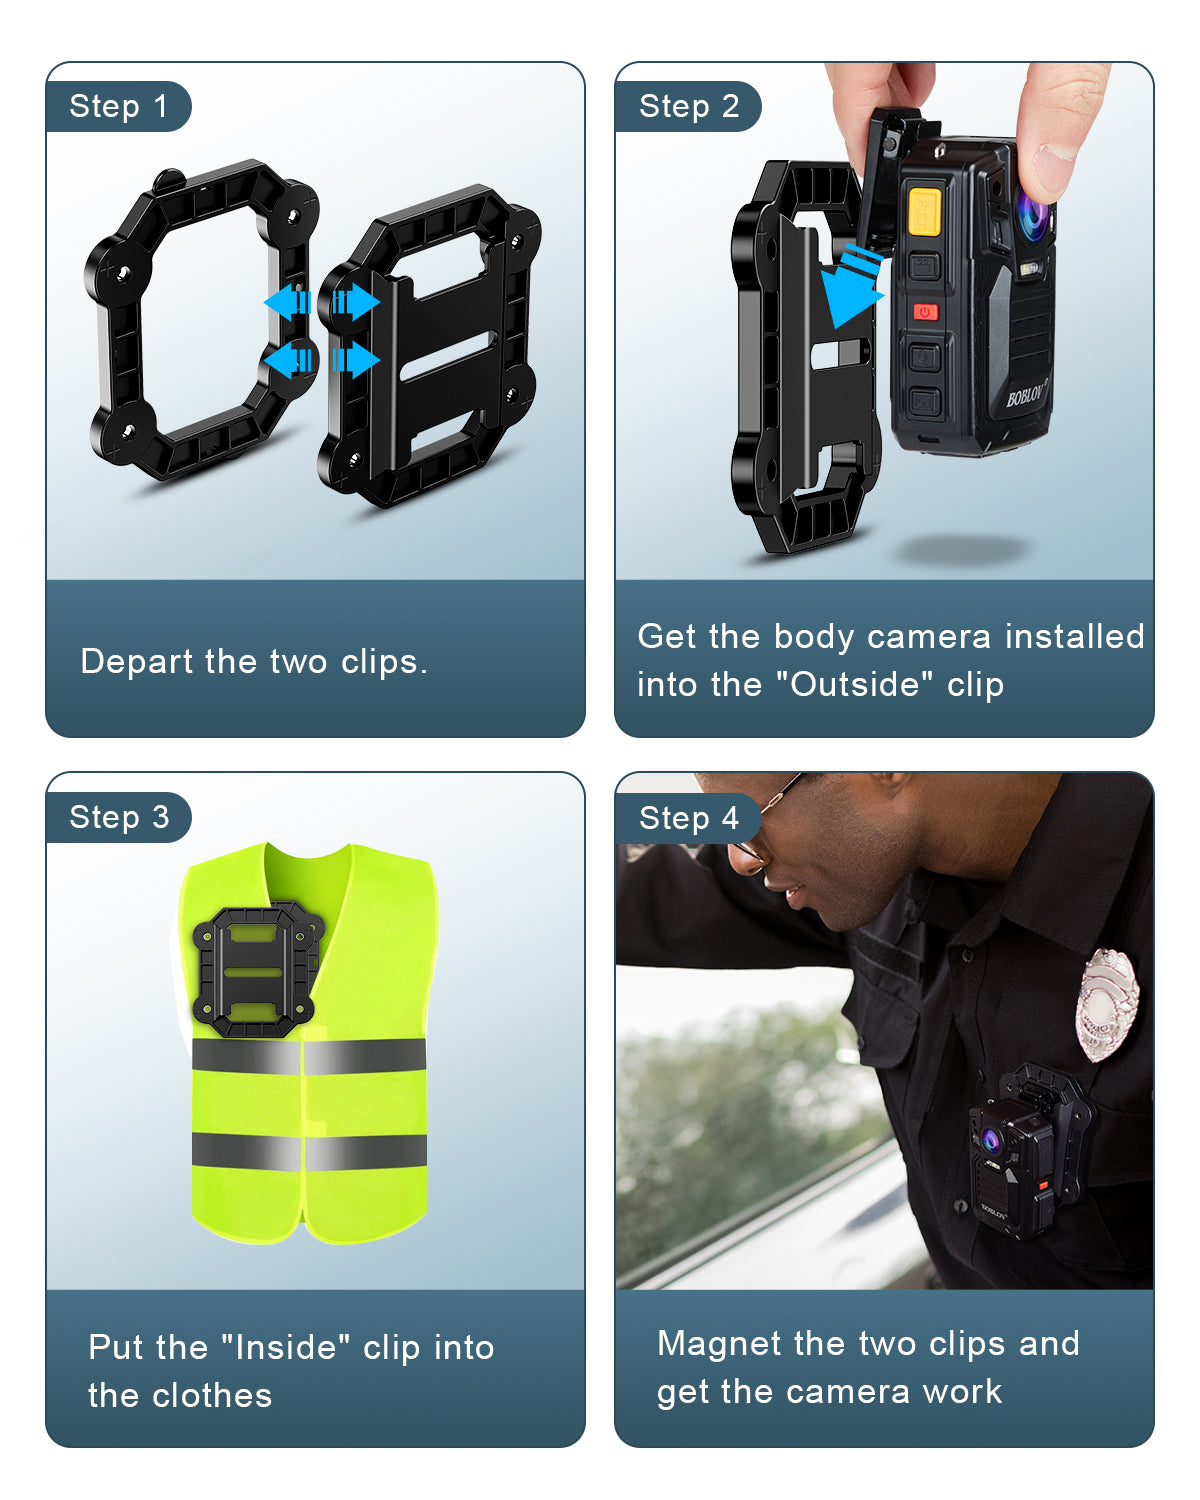 BOBLOV Body Camera Magnet Mounts, New Type & Portable Black Silica Clips, Universal Magnetic Suction Back Clip with Built-in 8 Magnets, Stick All Brand Body Camera to Uniforms